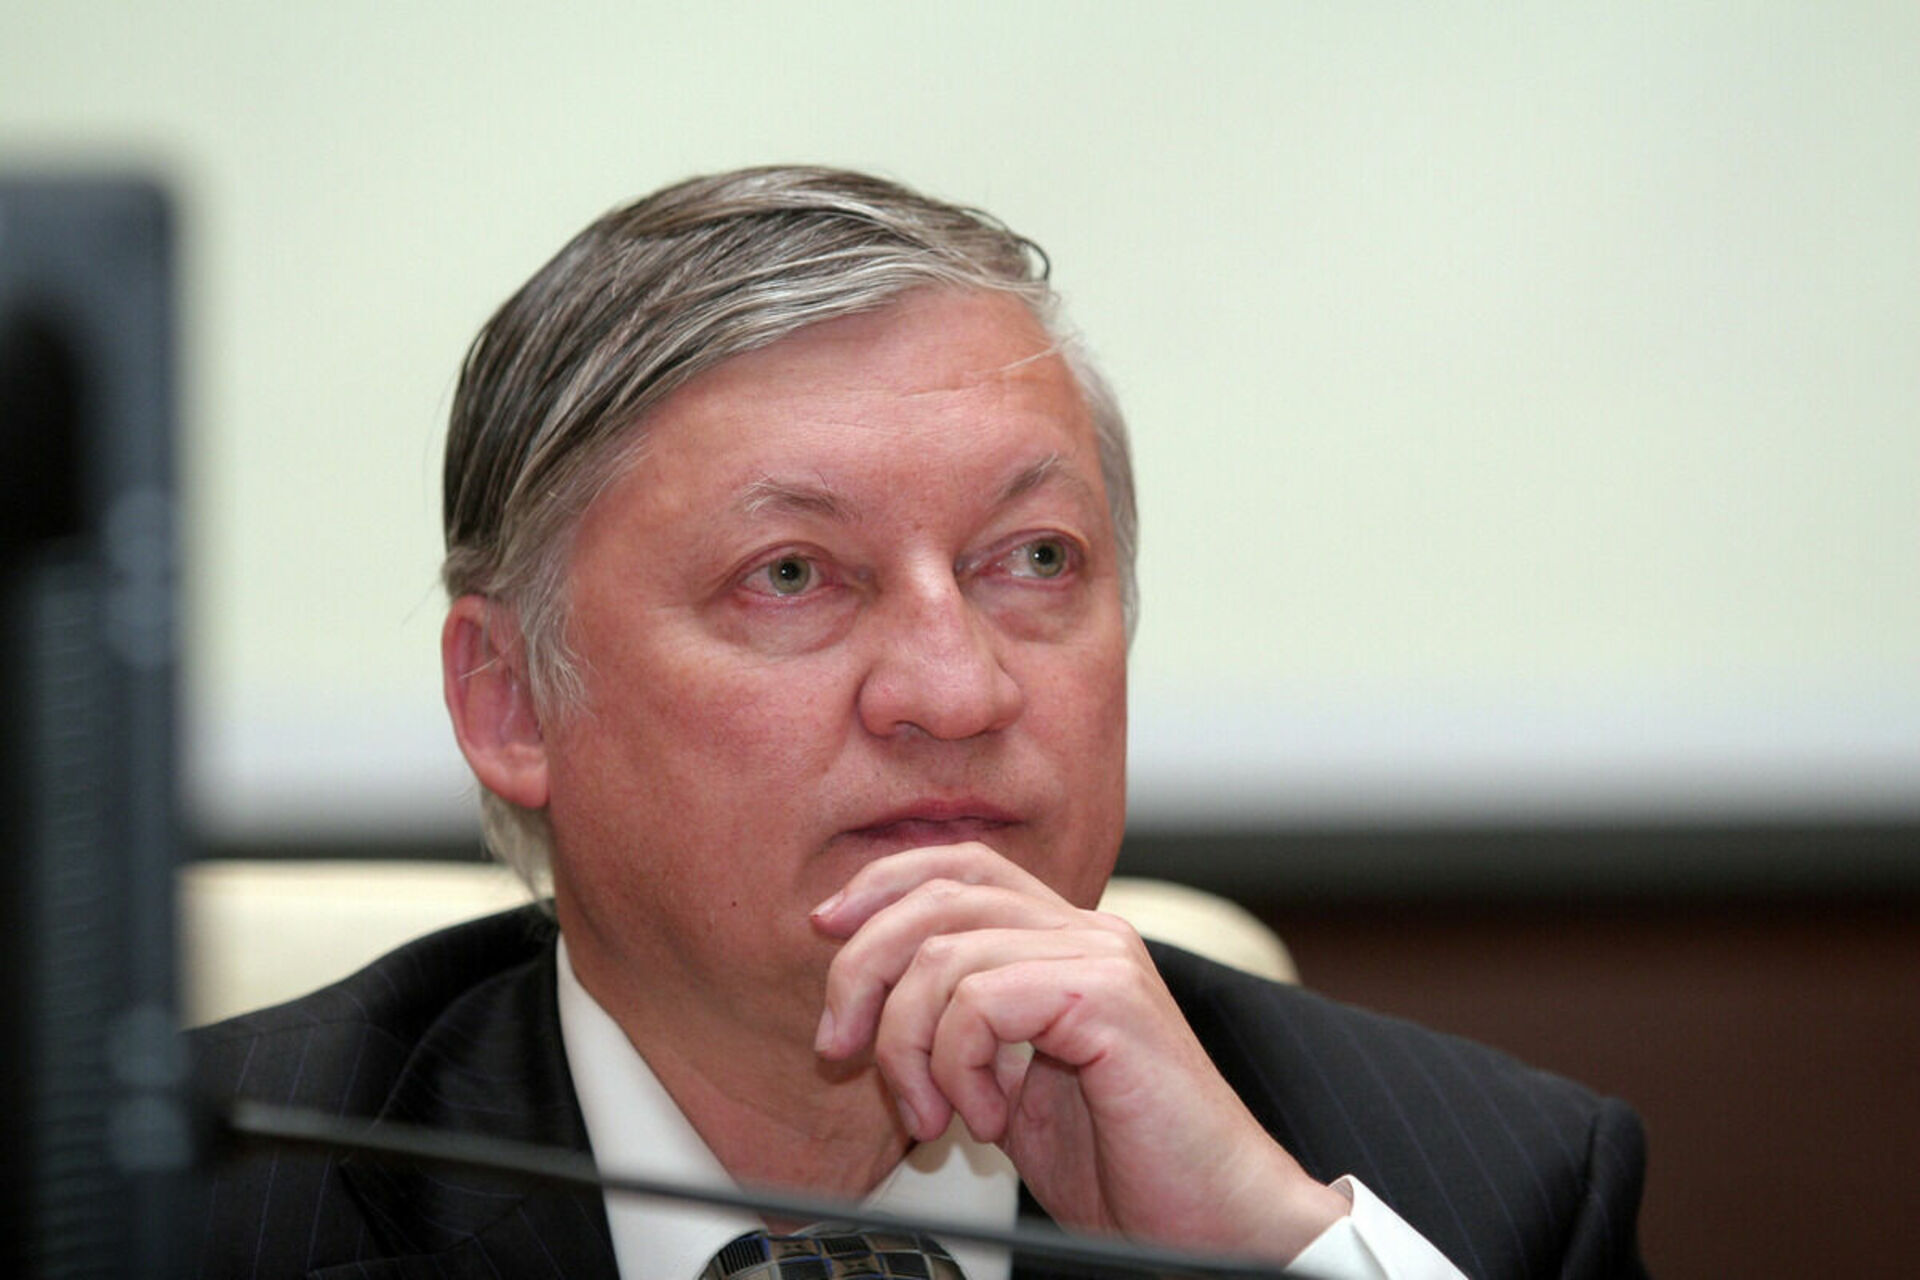 Anatoly Karpov Hospitalized in Serious Condition